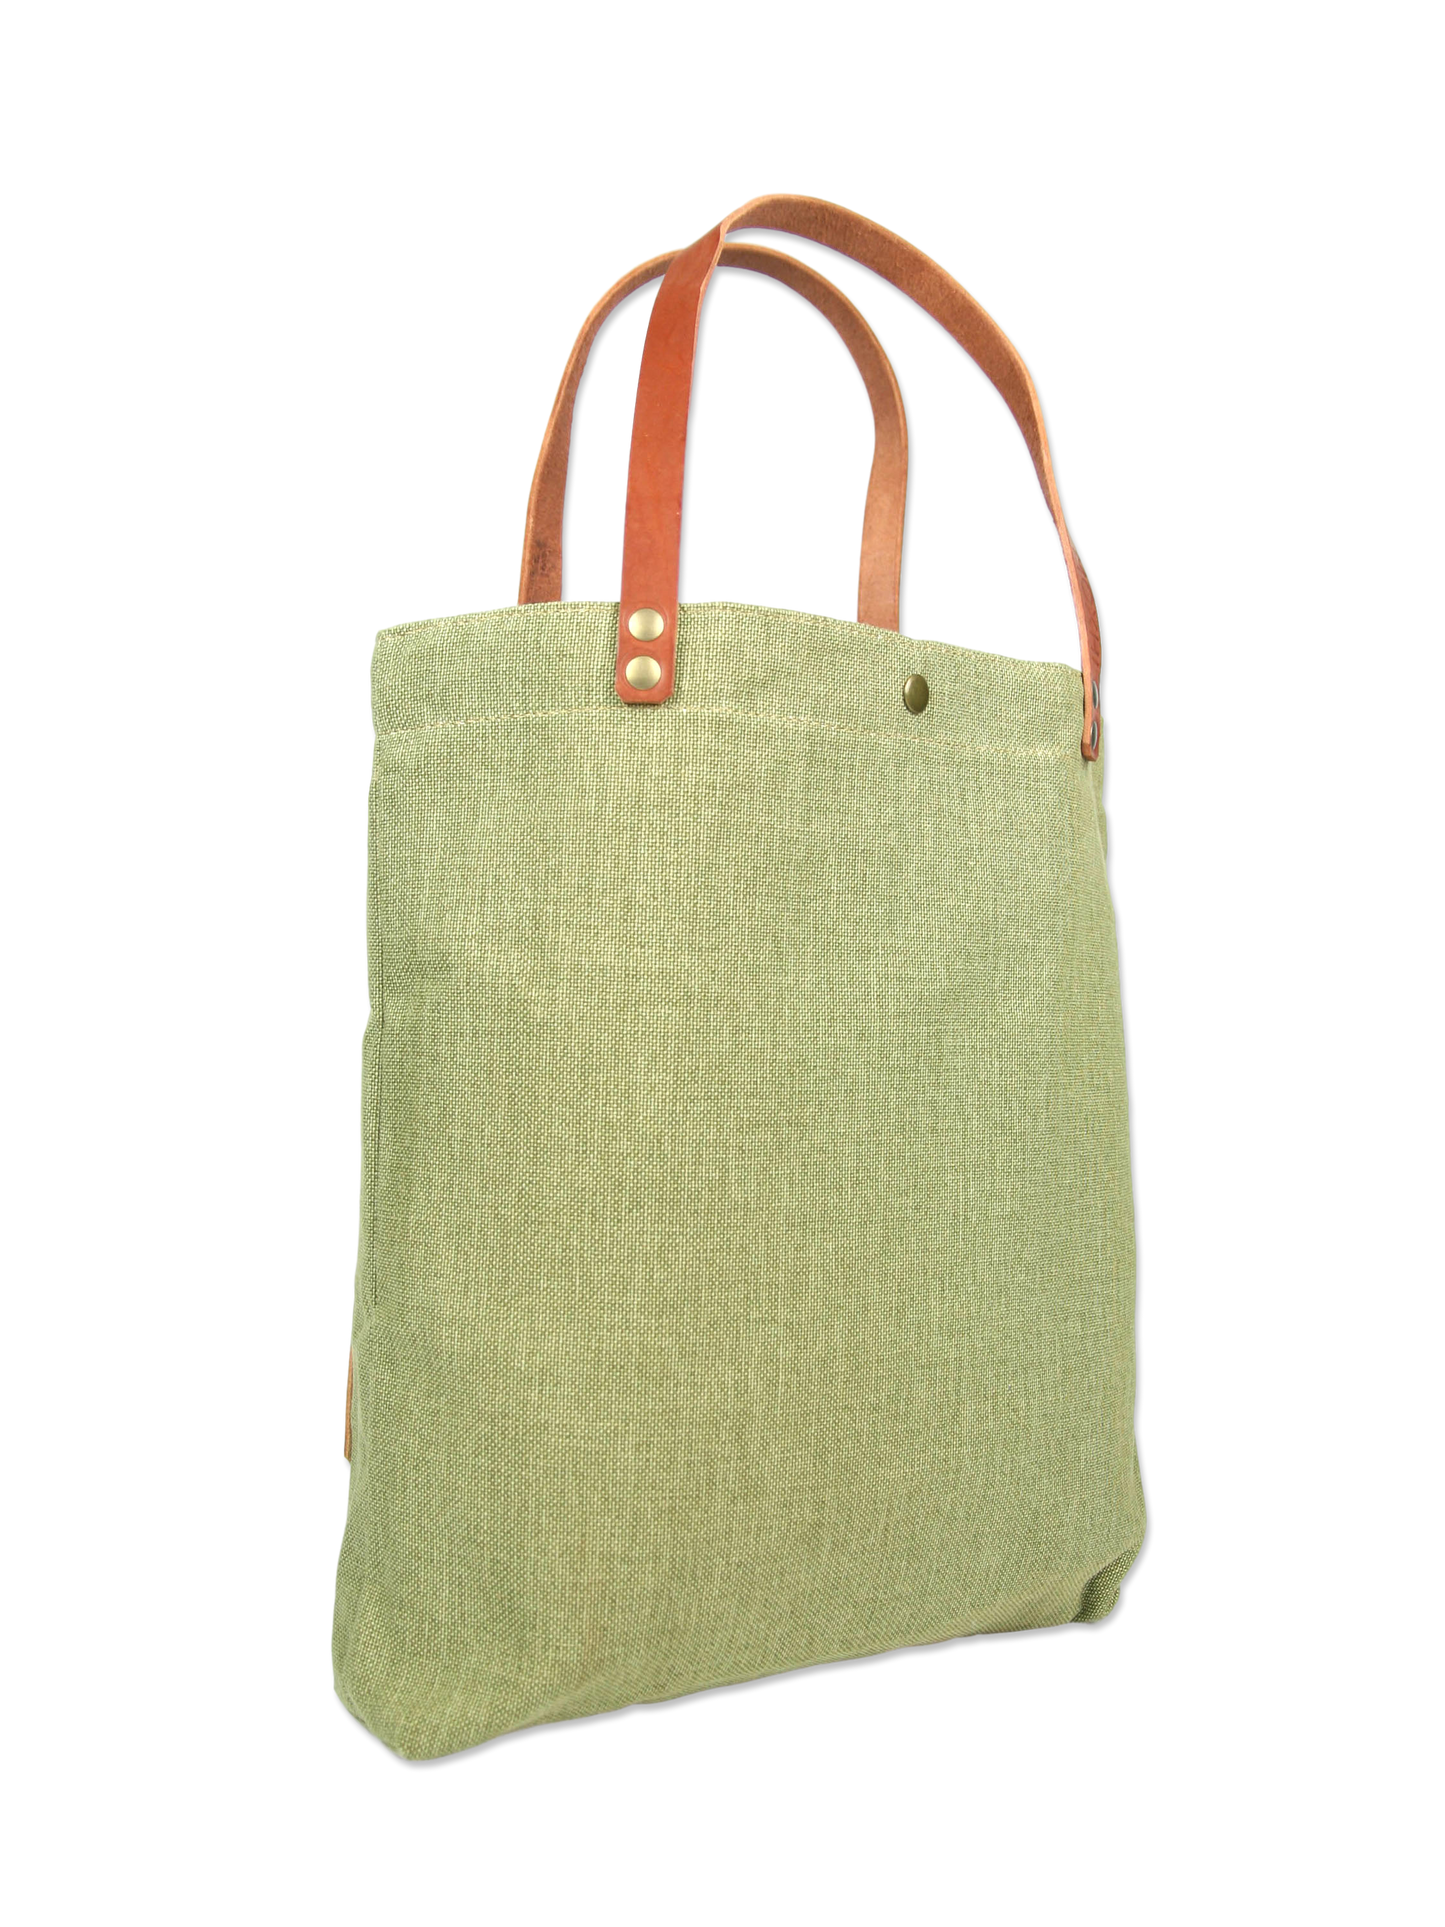 Handcrafted leather shopper bag